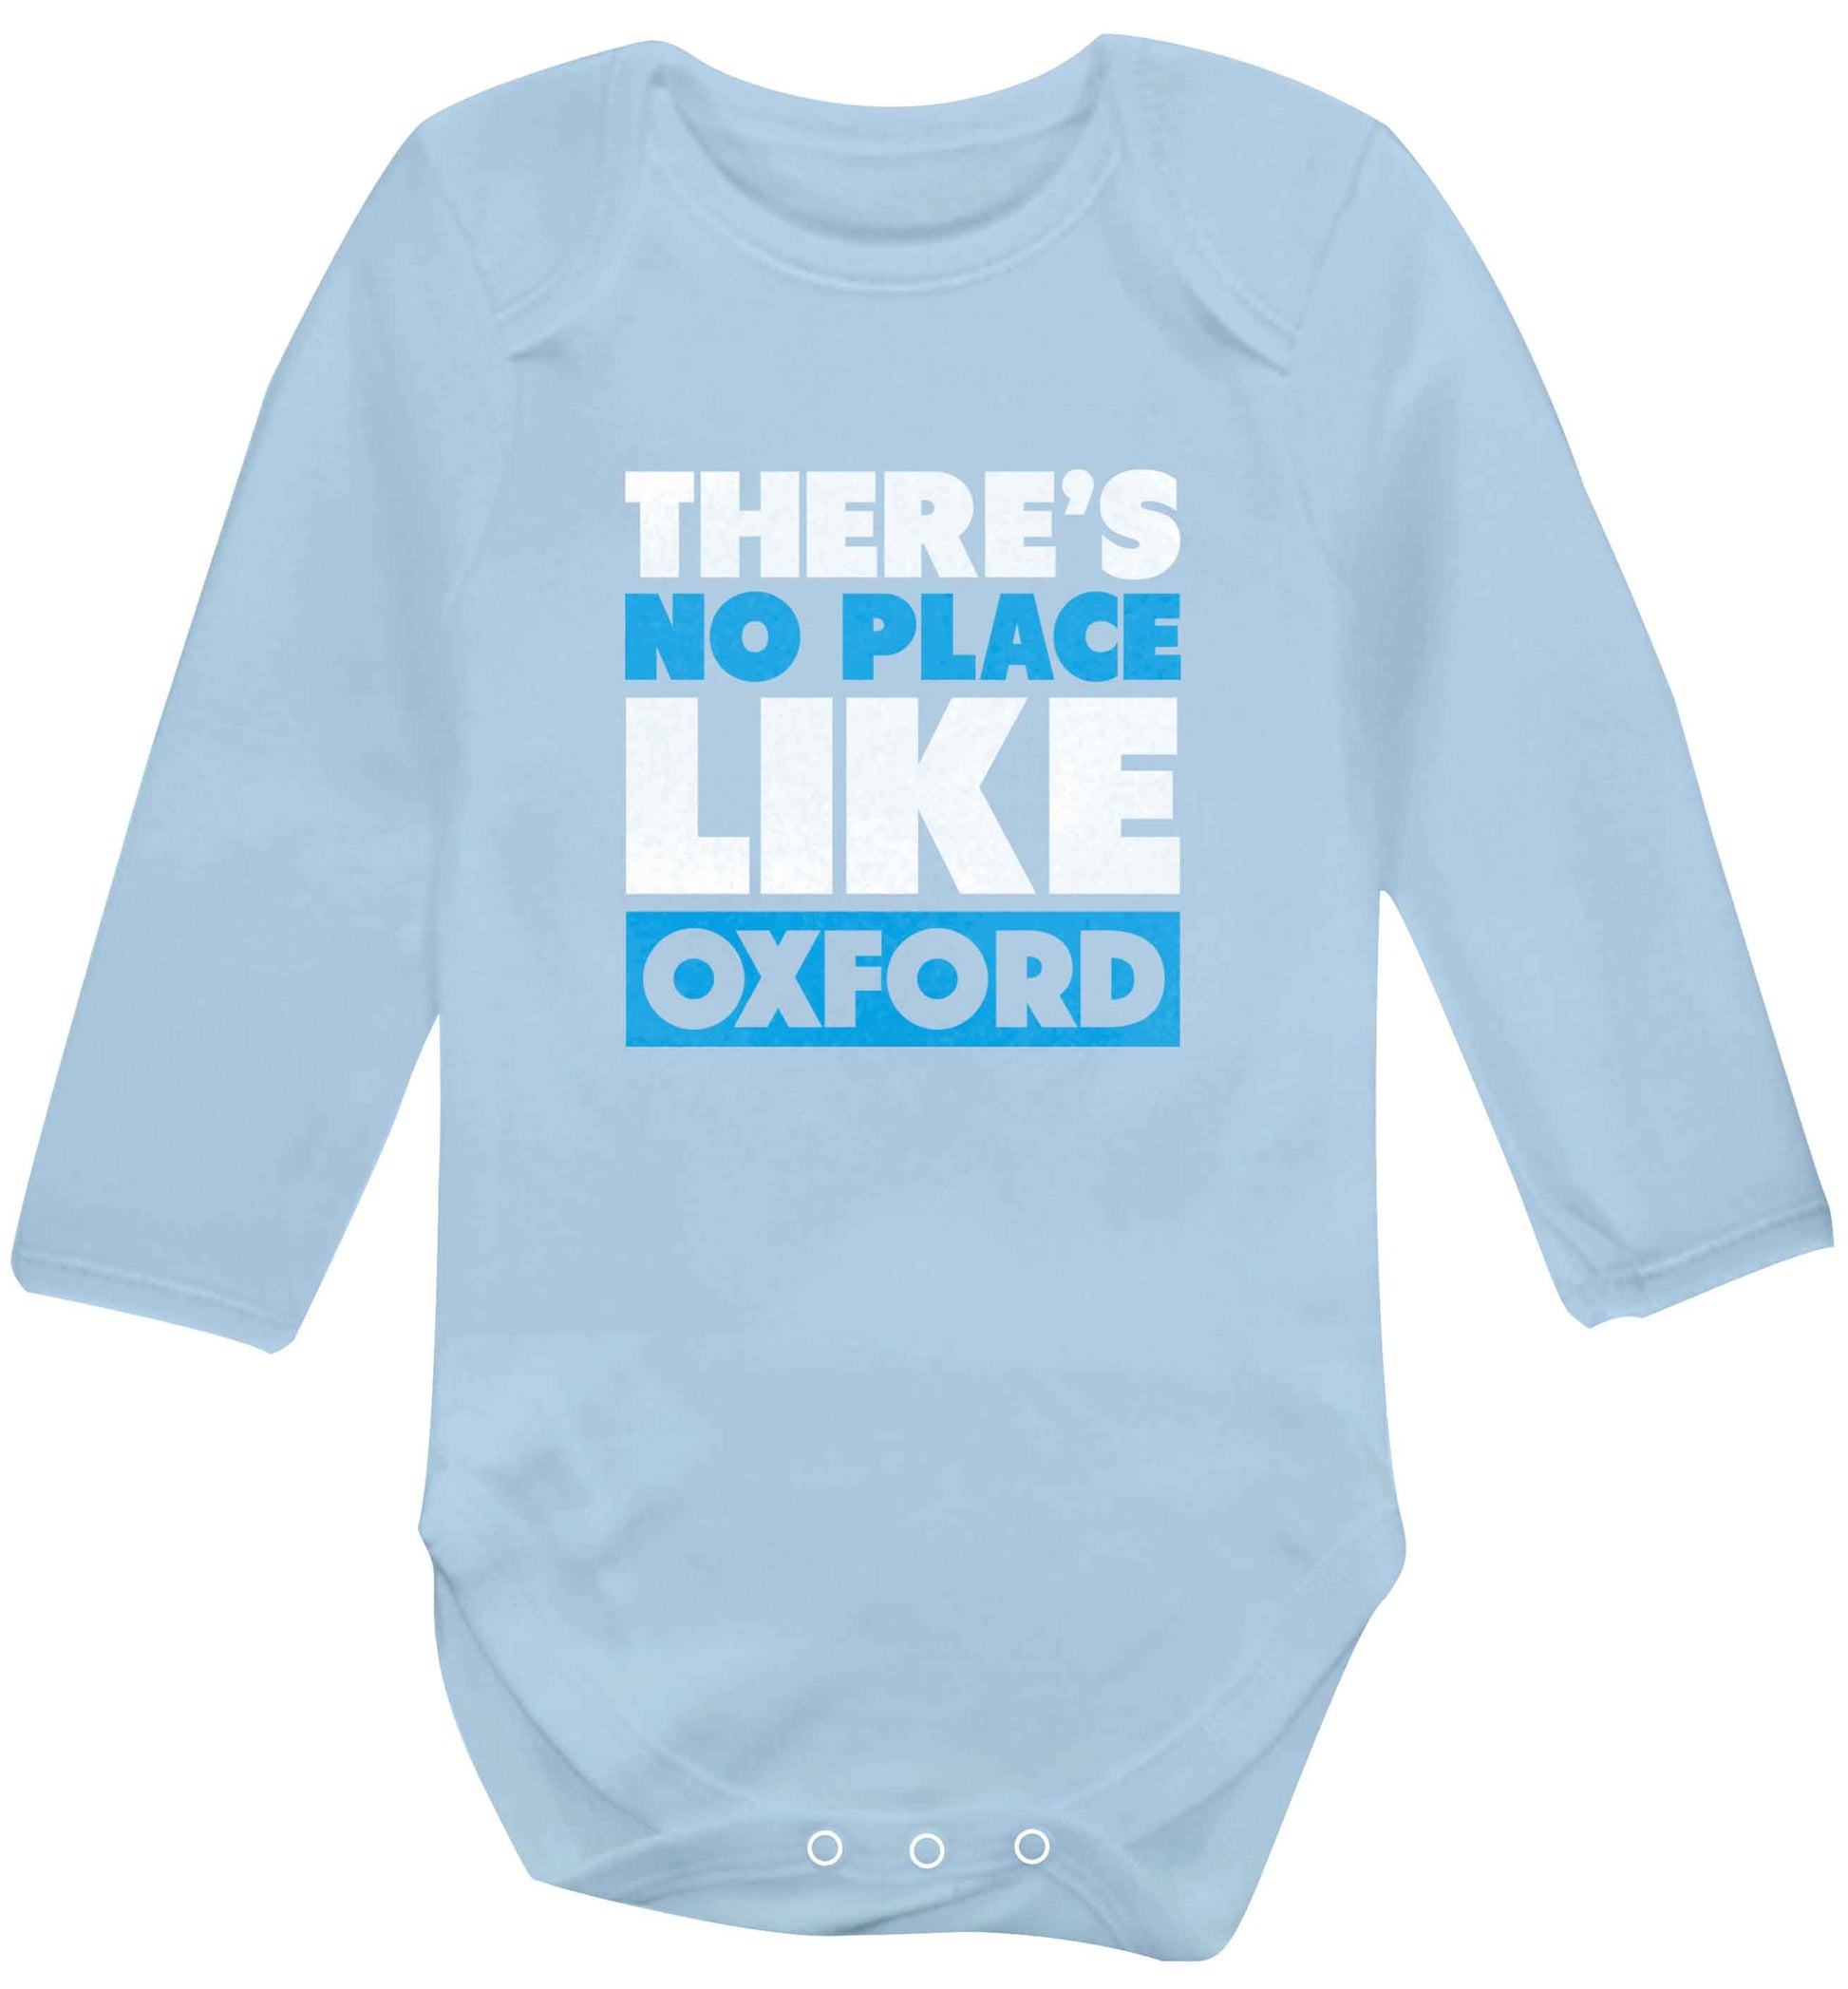 There's no place like Oxford baby vest long sleeved pale blue 6-12 months